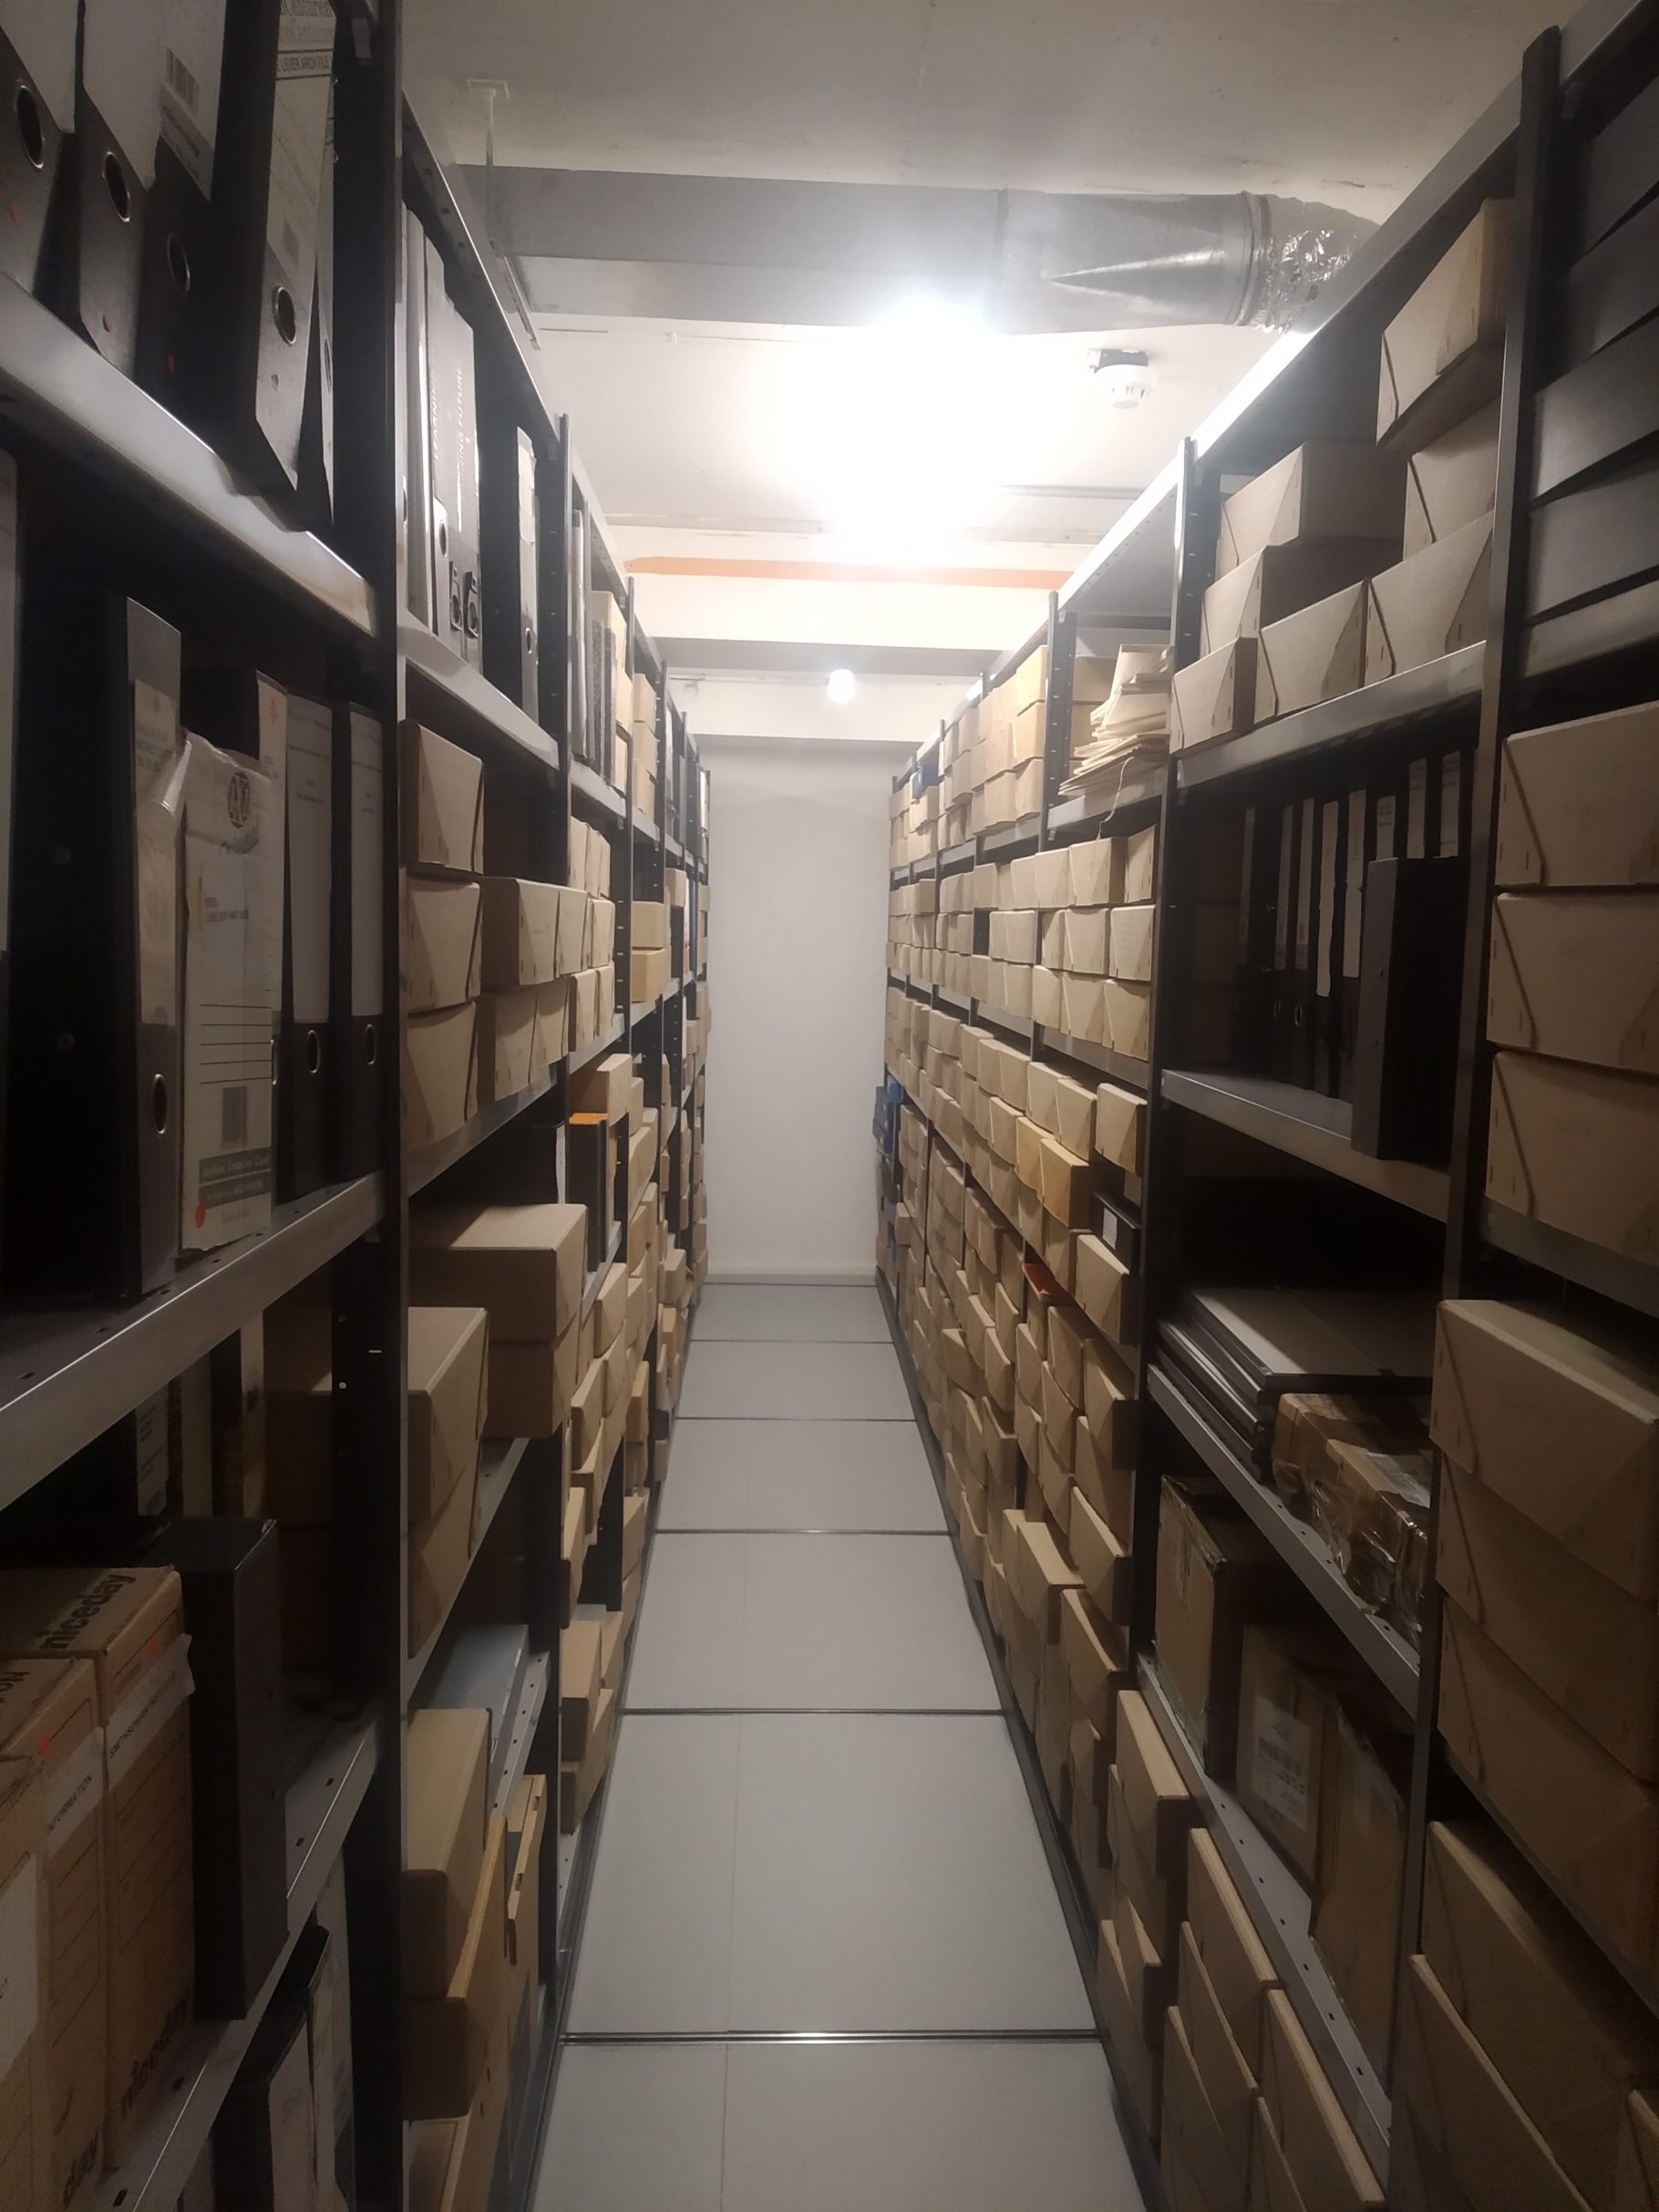 An image of one of the strongrooms at the University of Westminster archive, showing a corridor of shelving full of archival storage boxes.